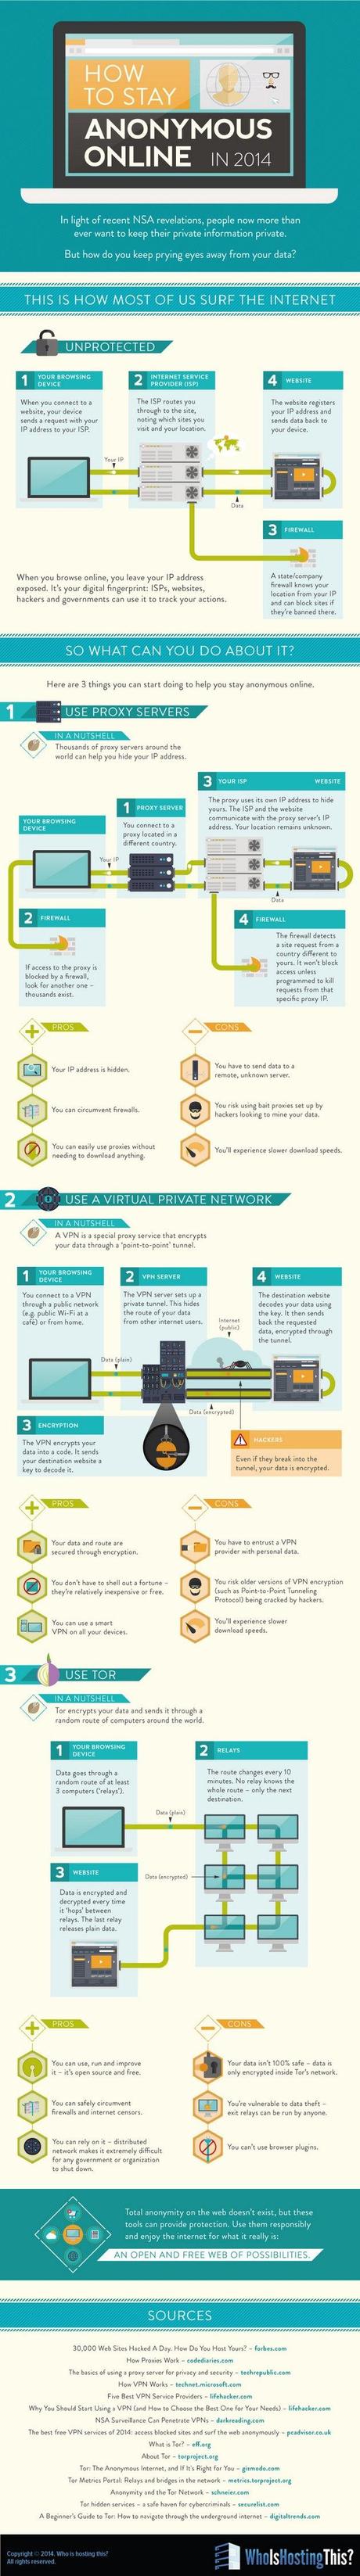 browse-anonymous-online-infographic